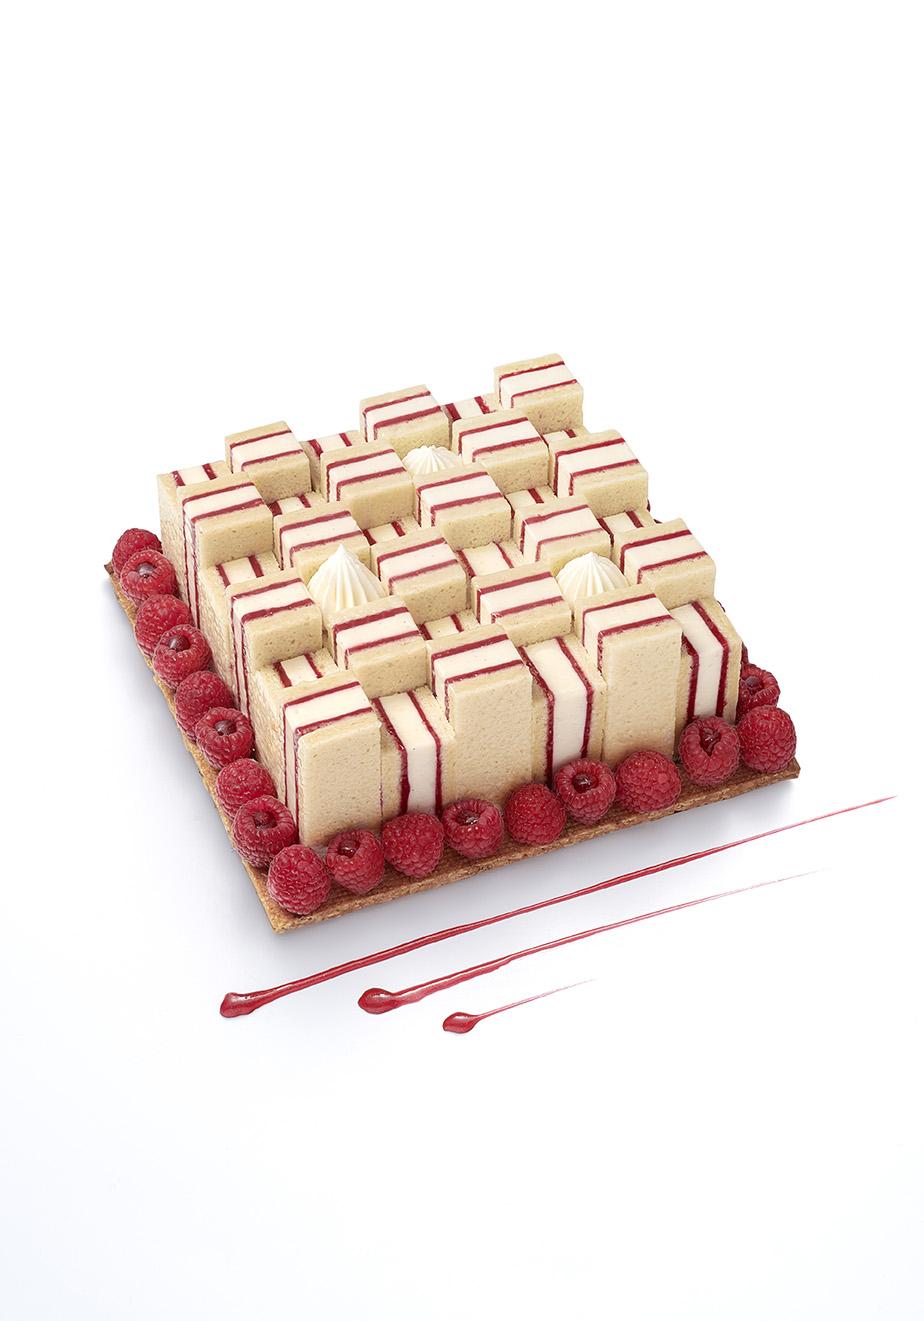 Elle Professionnel - CAKE Vire 2.0 Pastry bakery - & and RASPBERRY